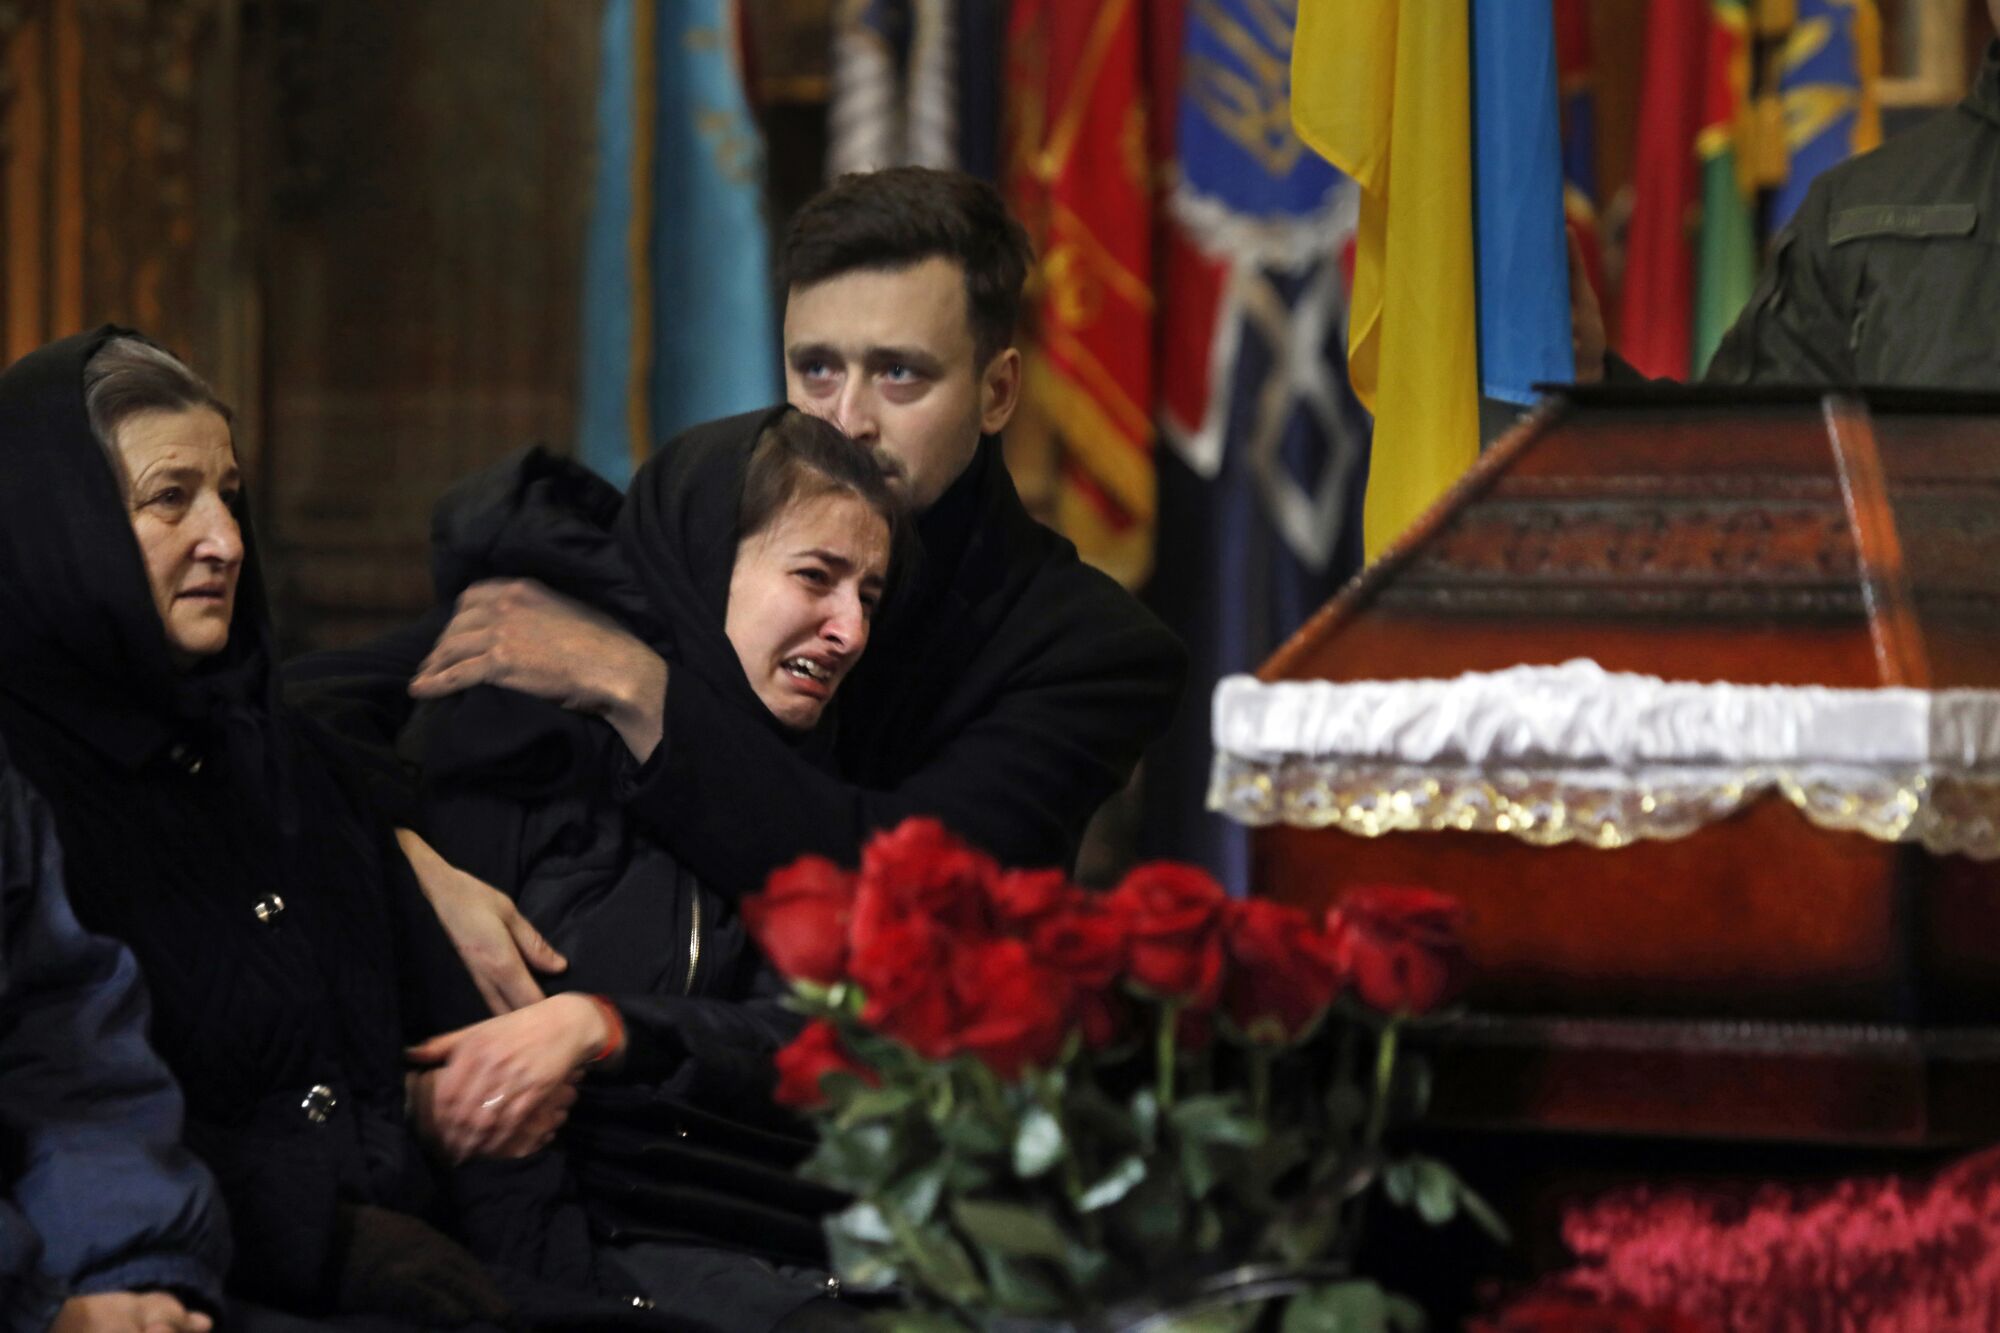 The funeral for Denis Metyolkin was held at the Saints Peter and Paul Garrison Church